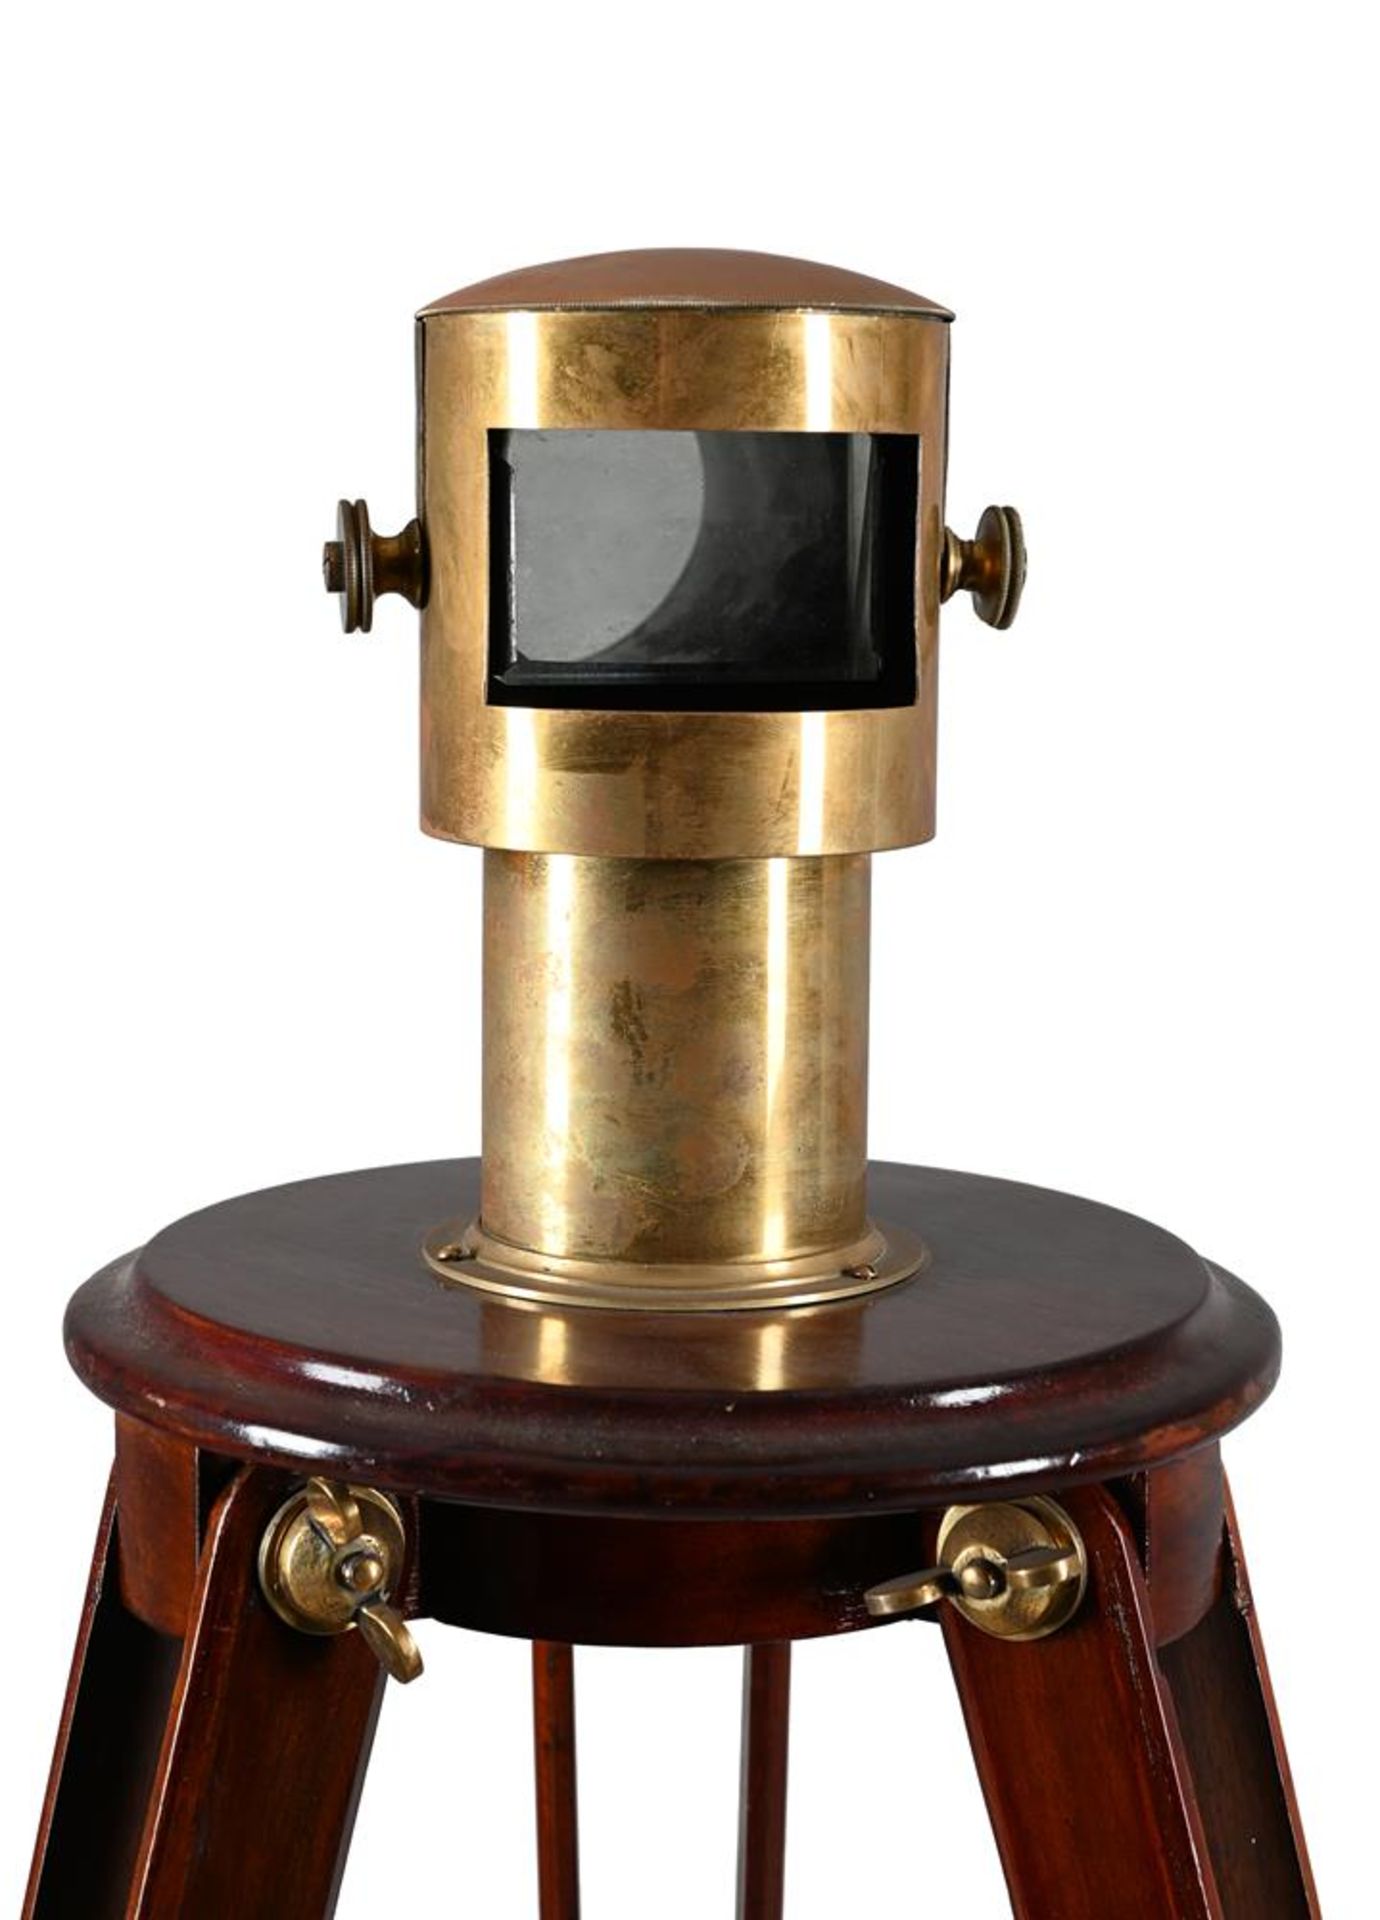 A BRASS-CASED REFLECTING PRISM ON MAHOGANY TRIPOD STAND - Image 2 of 3